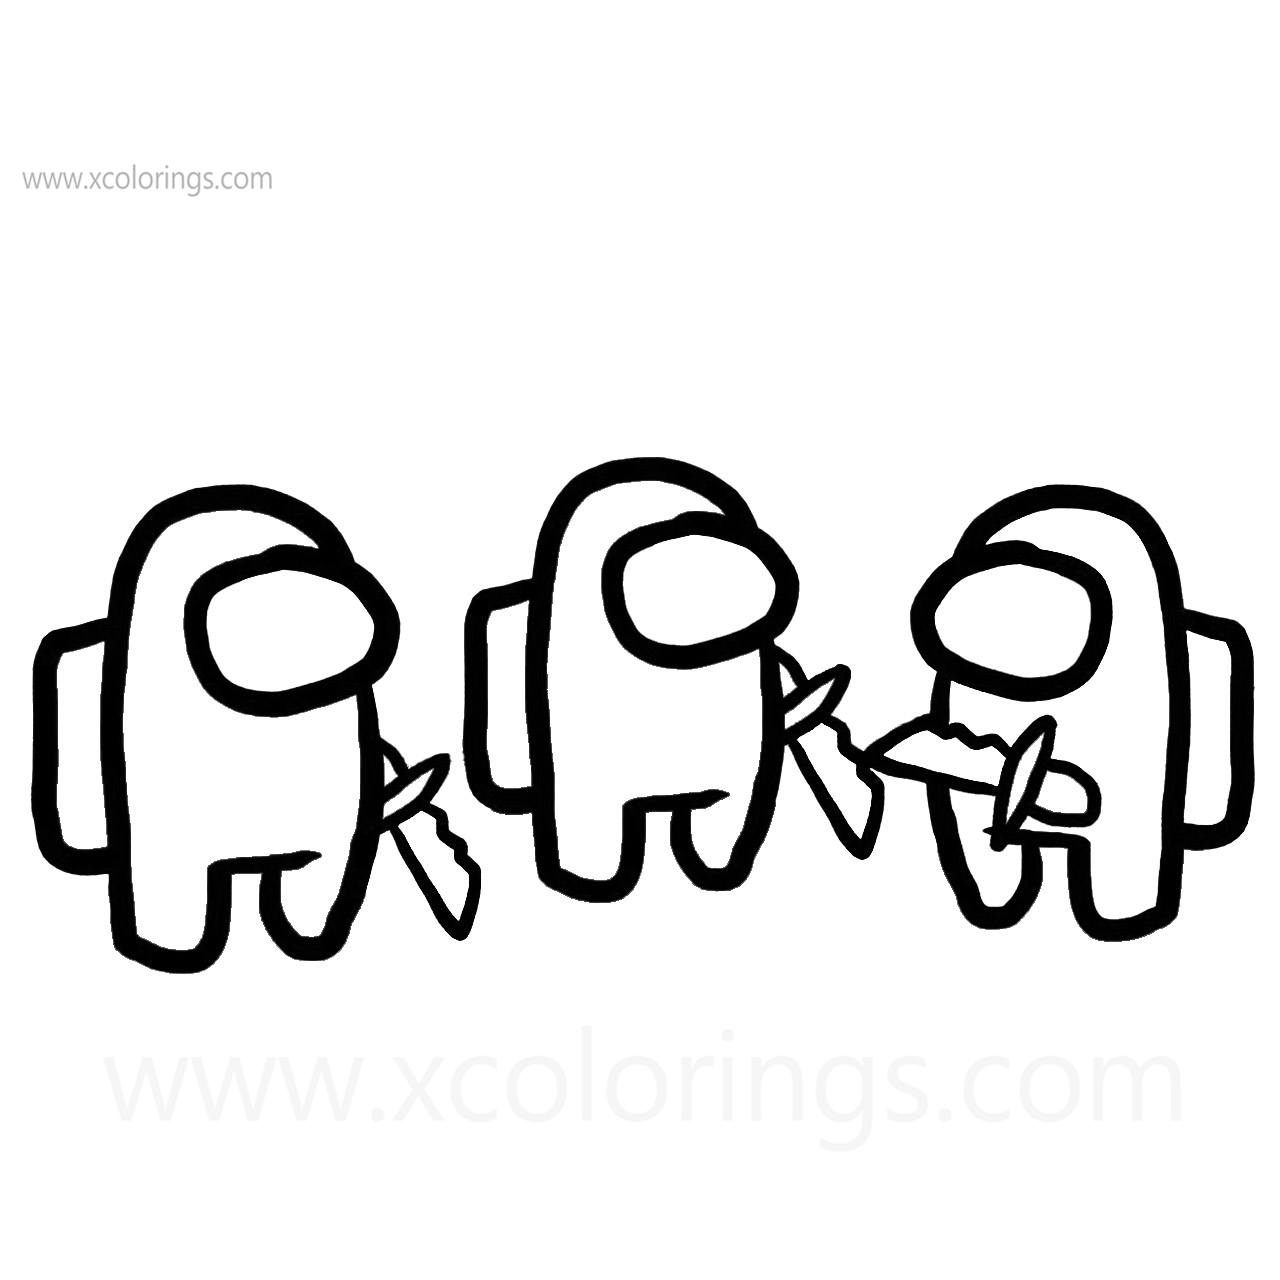 Among Us Coloring Pages Three Impostors - XColorings.com